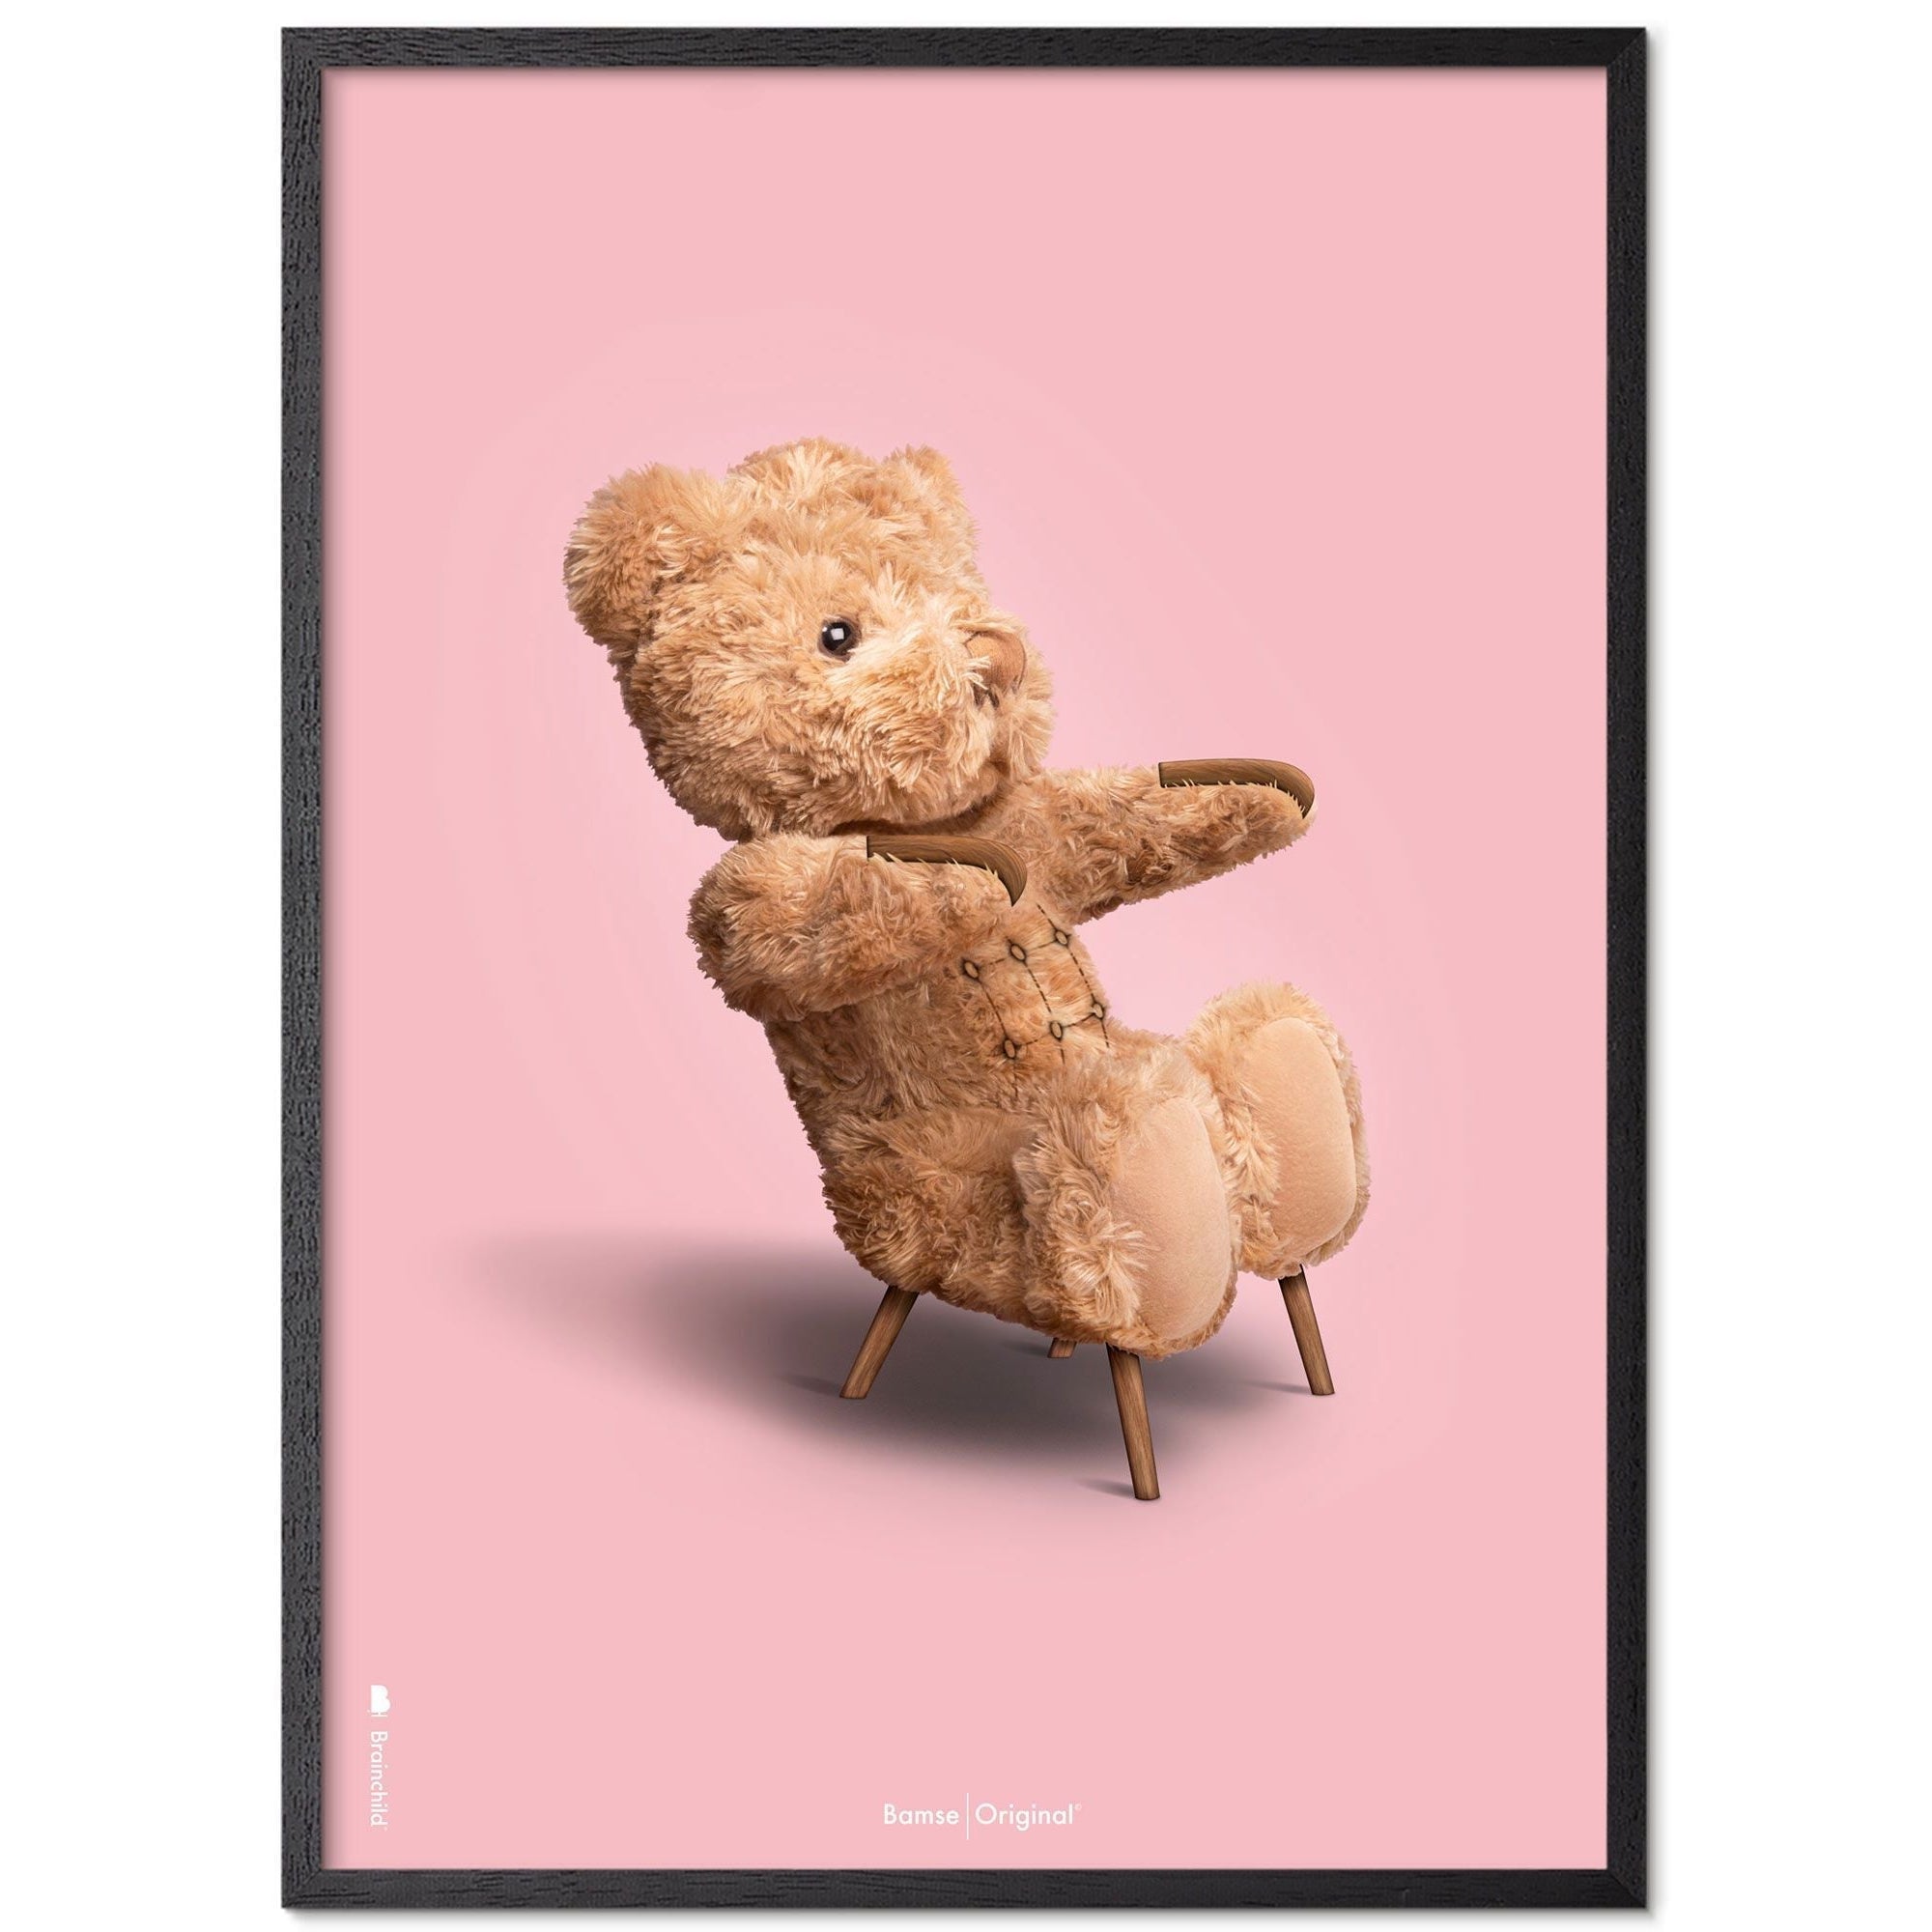 Brainchild Teddy Bear Classic Poster Frame In Black Lacquered Wood A5, Pink Background